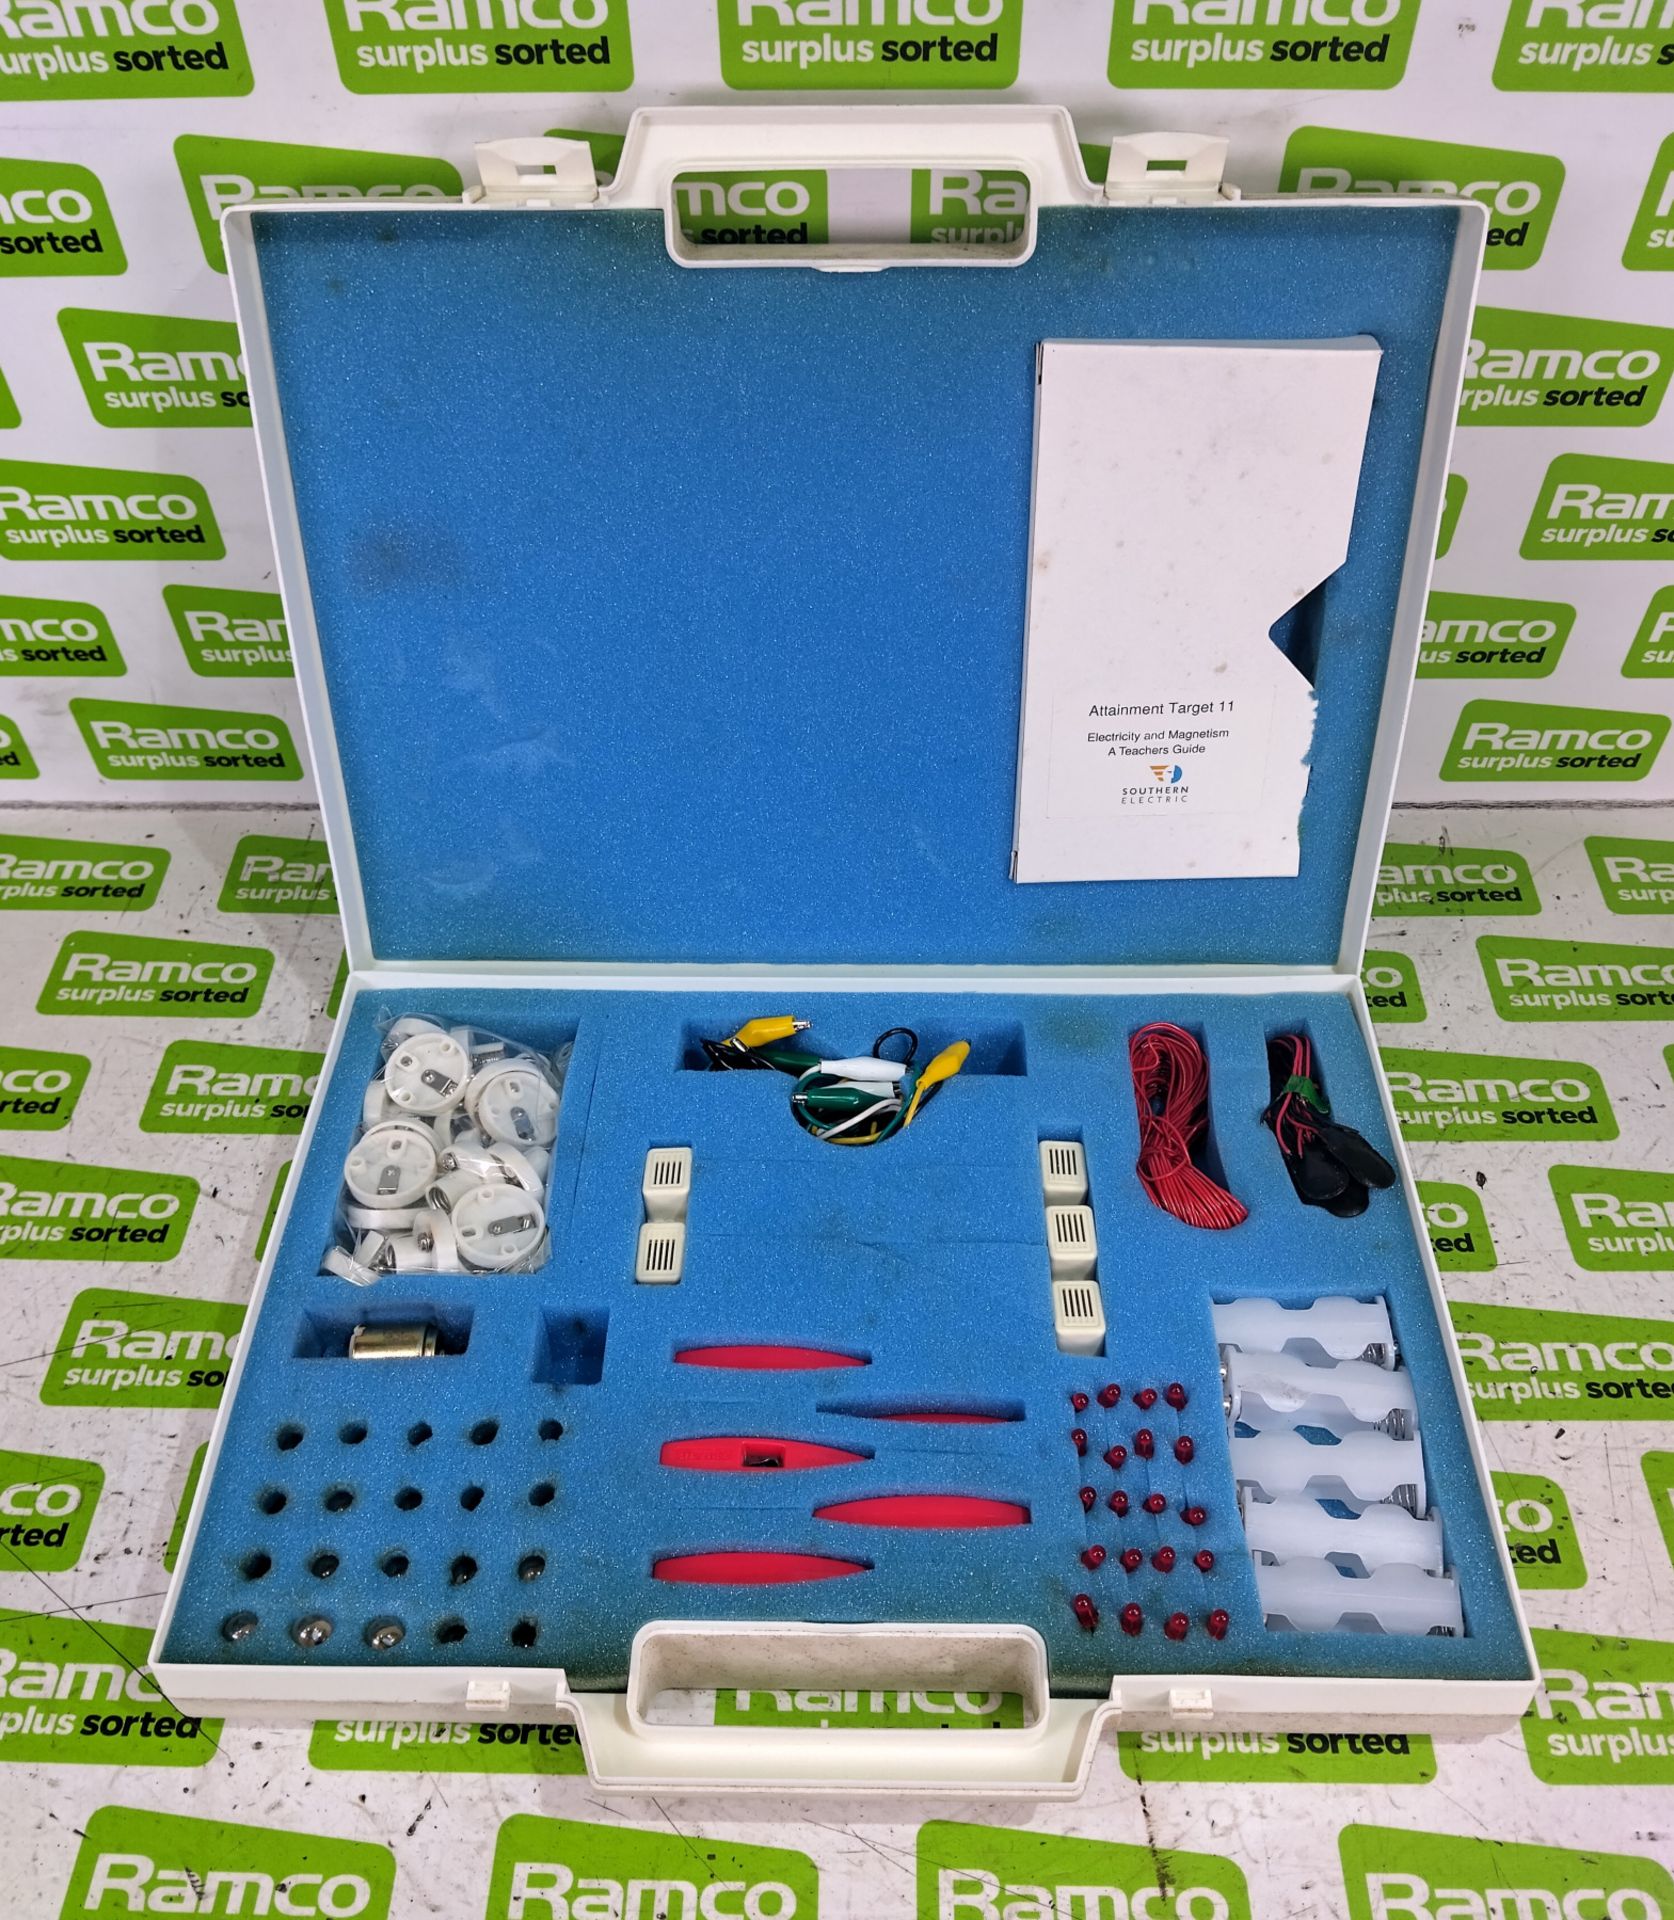 Southern Electric - The Electric Box - electronics kit for schools